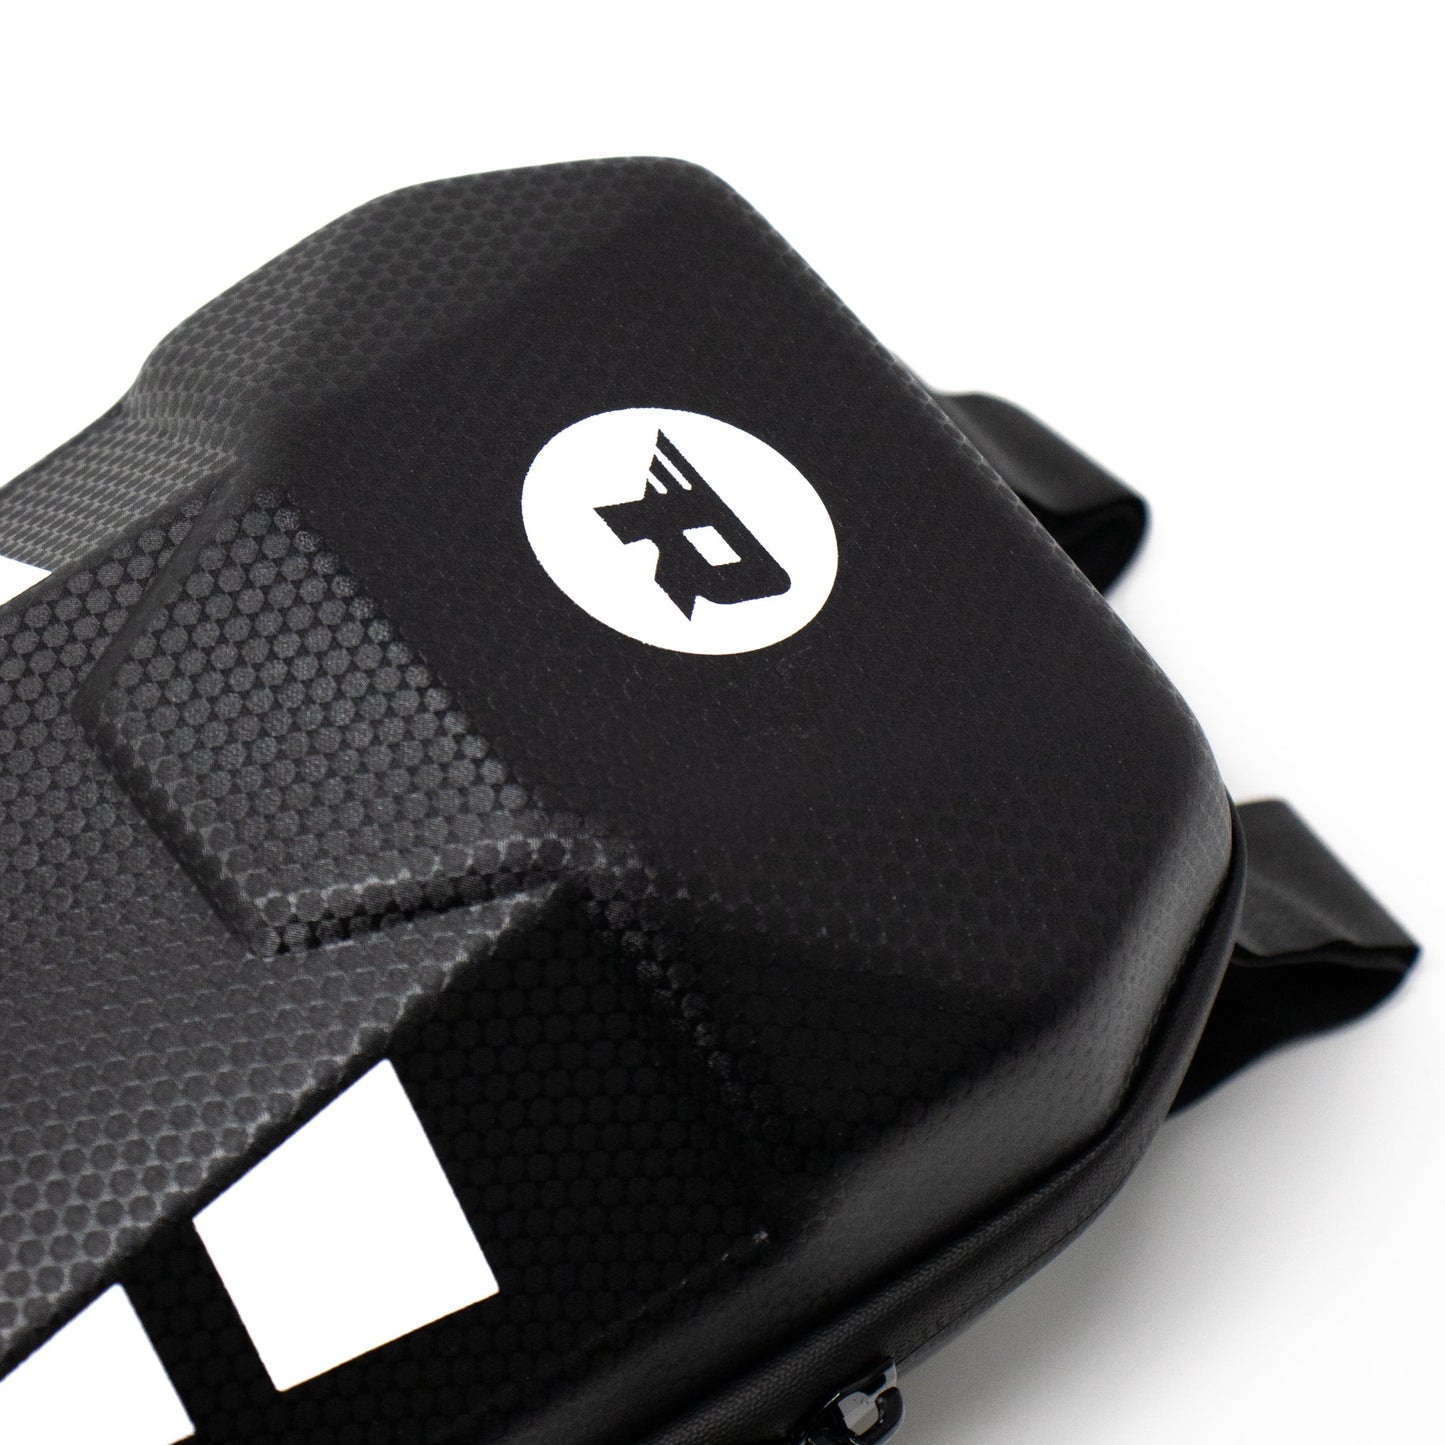 REV Rides Reflective Scooter Pouch - REVRides